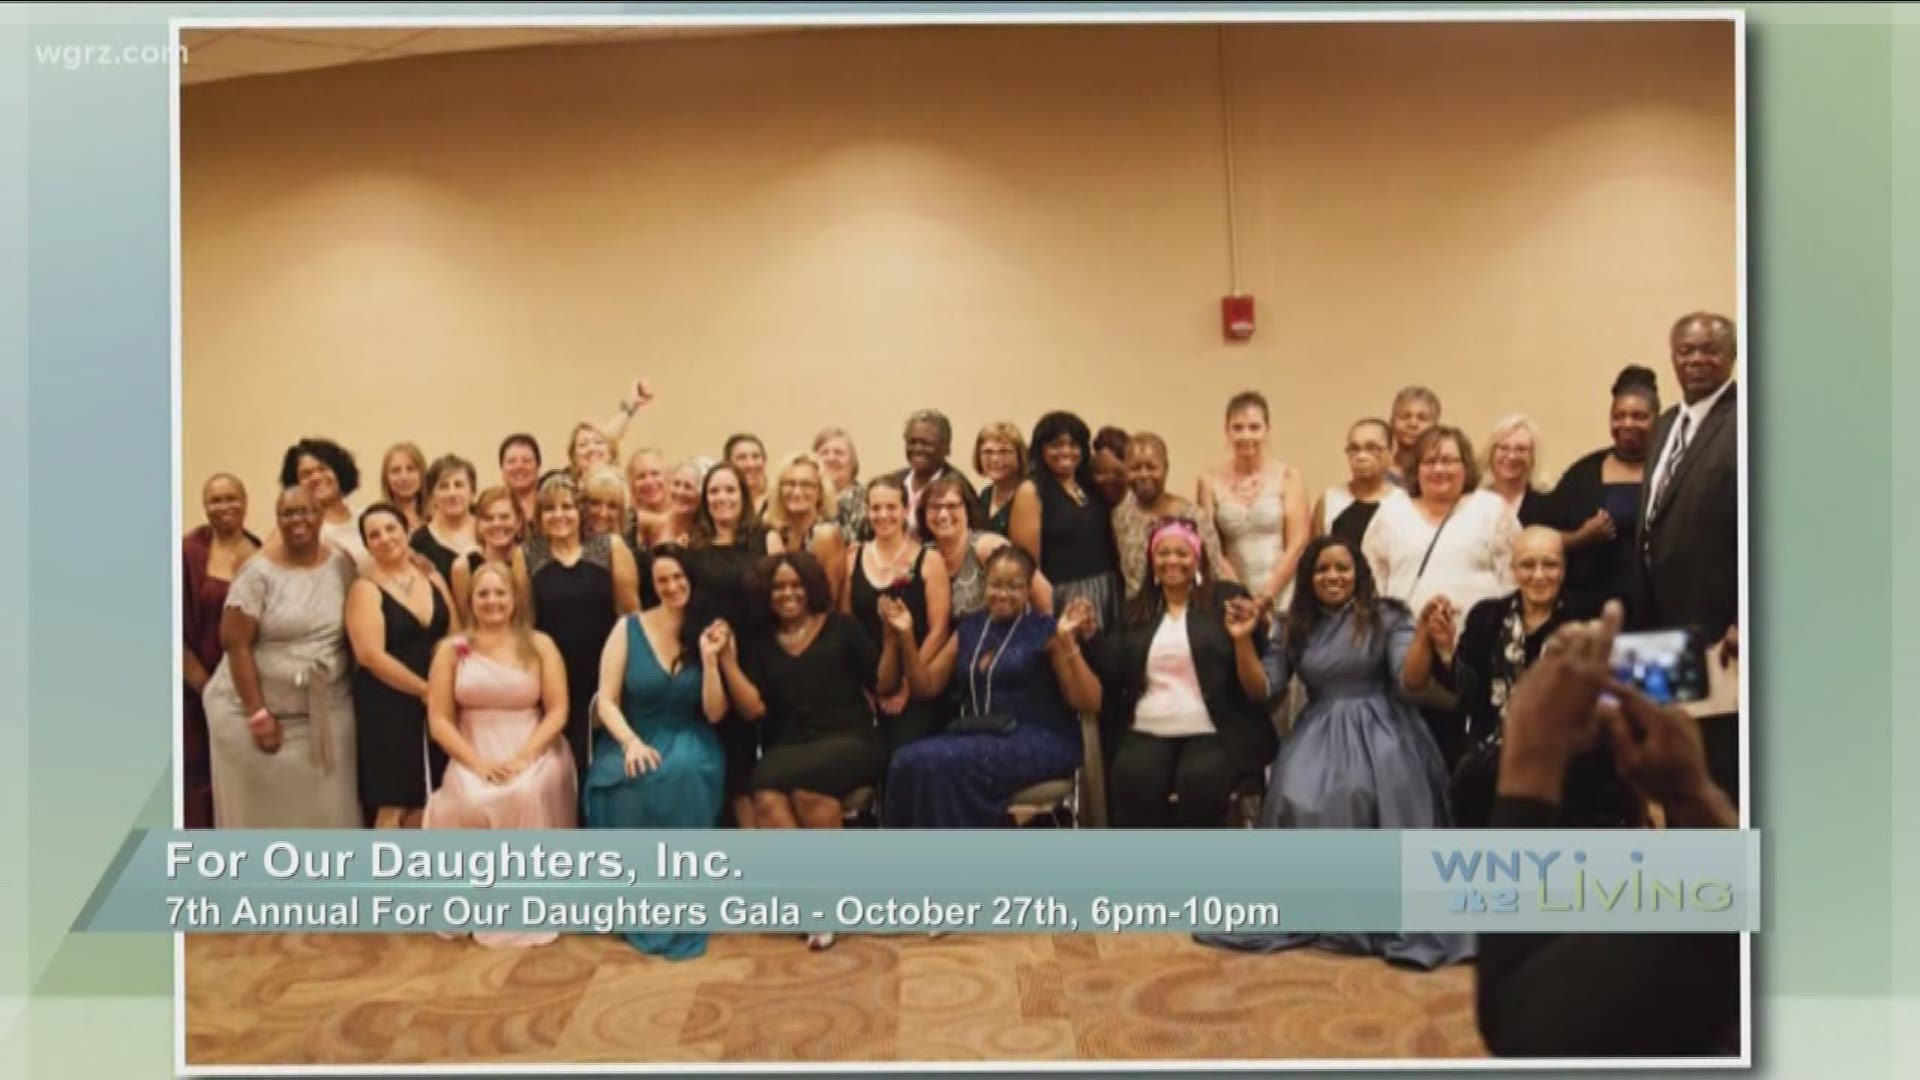 WNY Living - October 8 - For Our Daughters, Inc. 